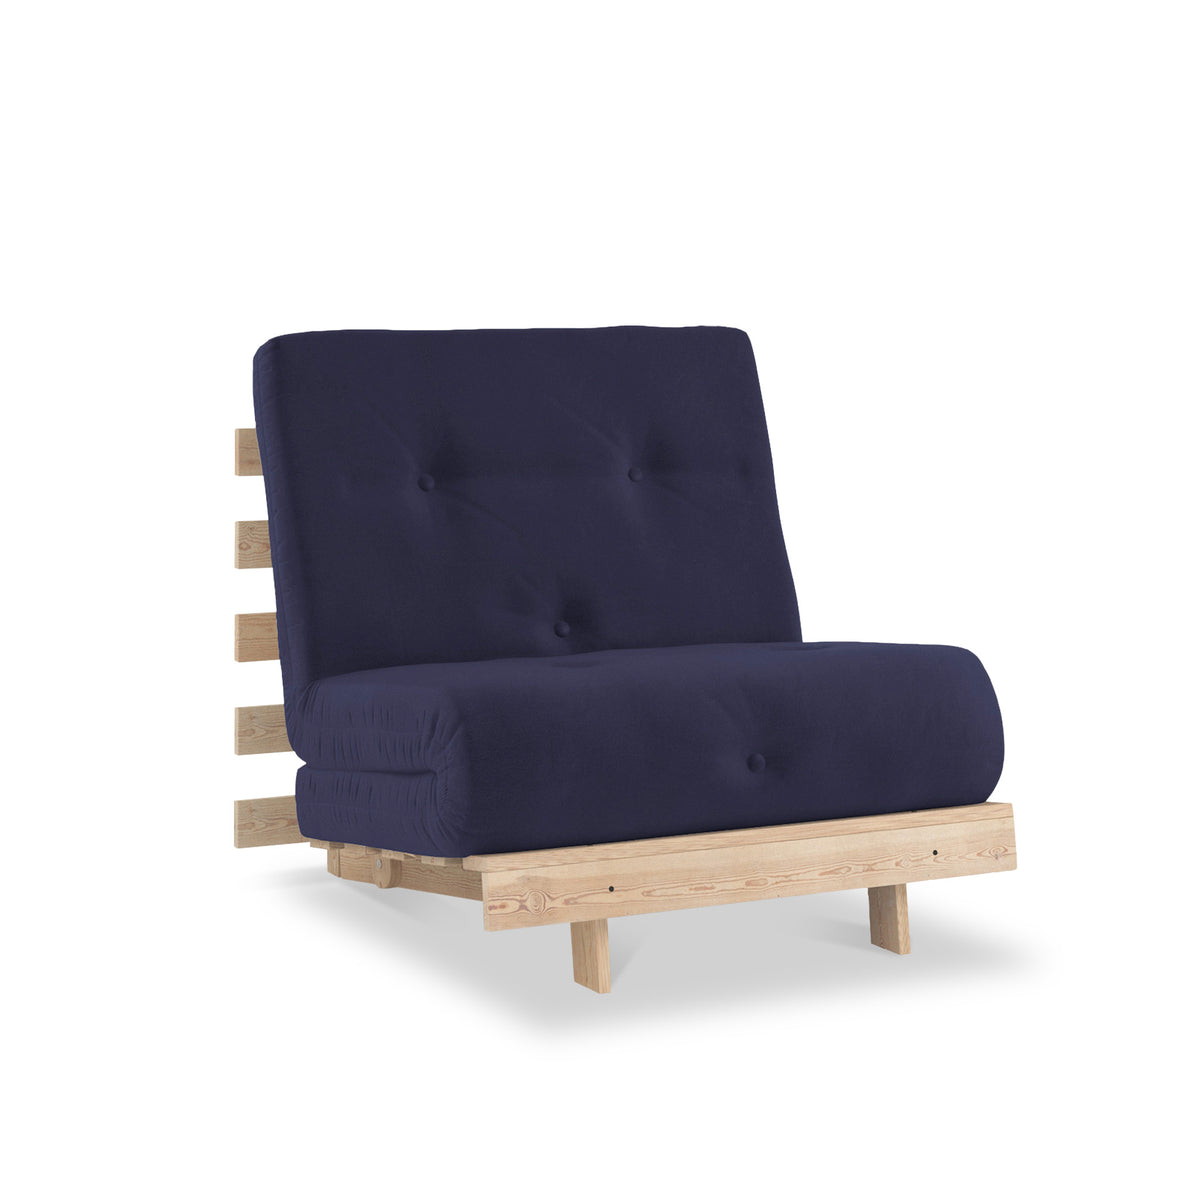 Maggie Navy Blue Single Futon Sofa Bed from Roseland Furniture